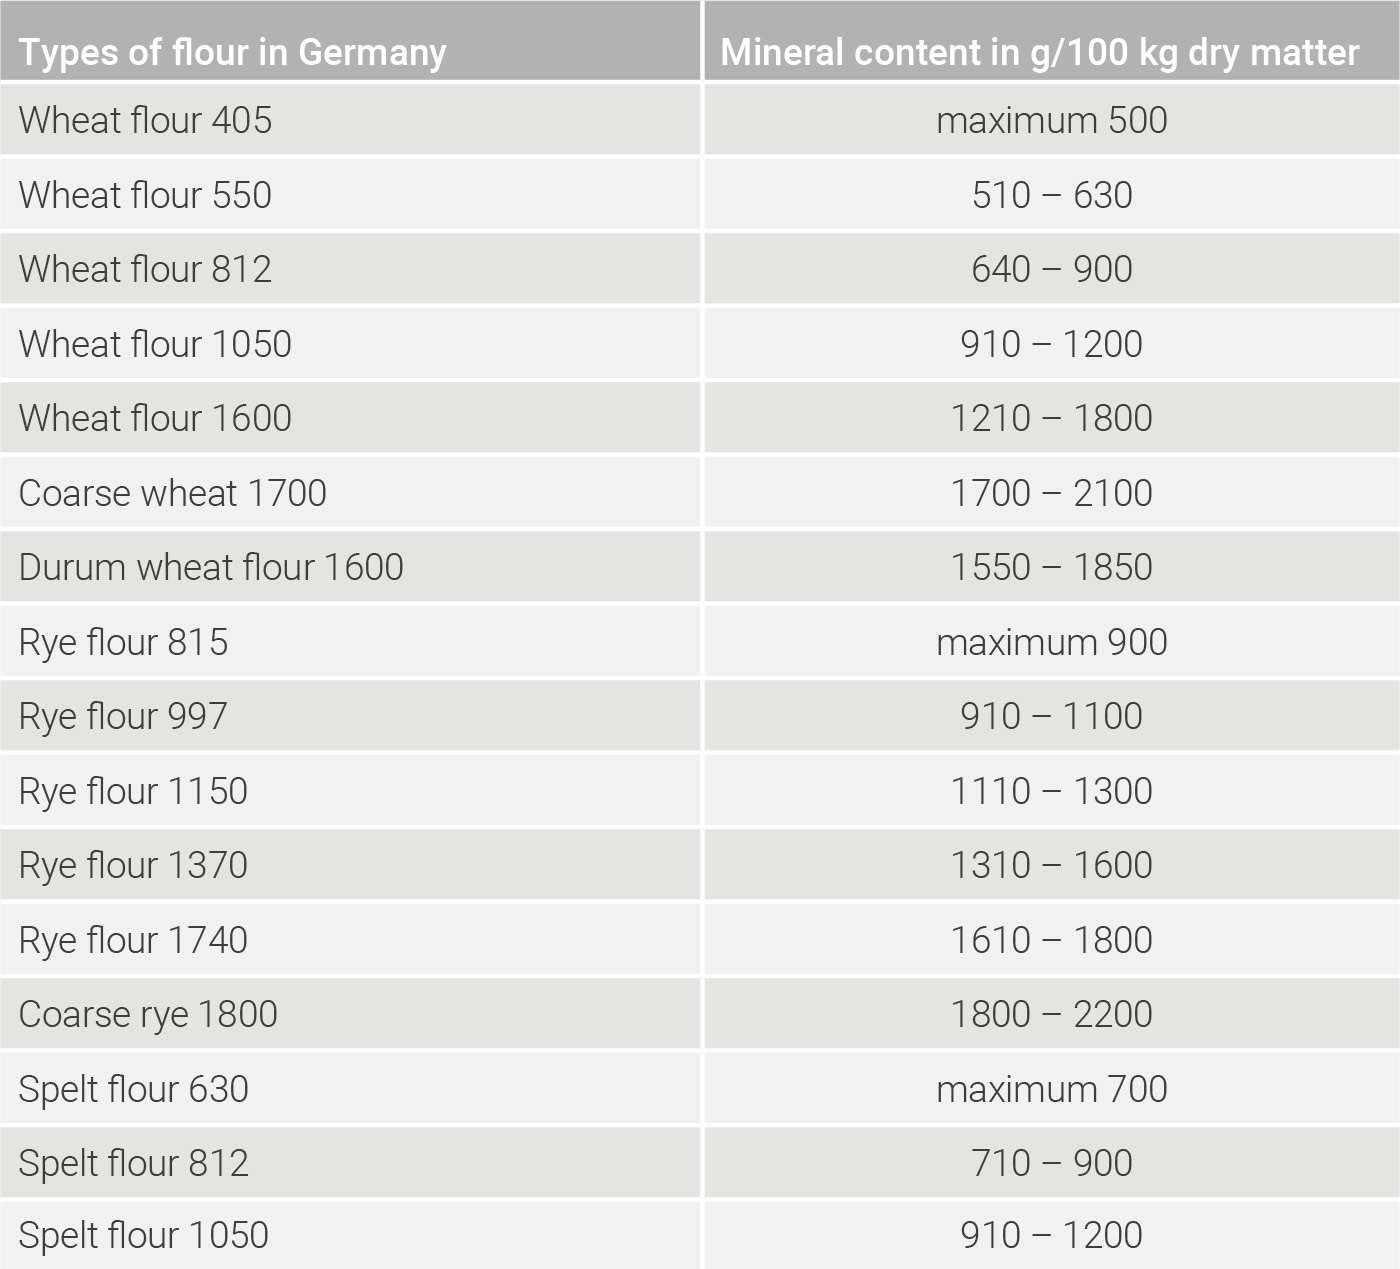 Mineral content of various ground products in Germany